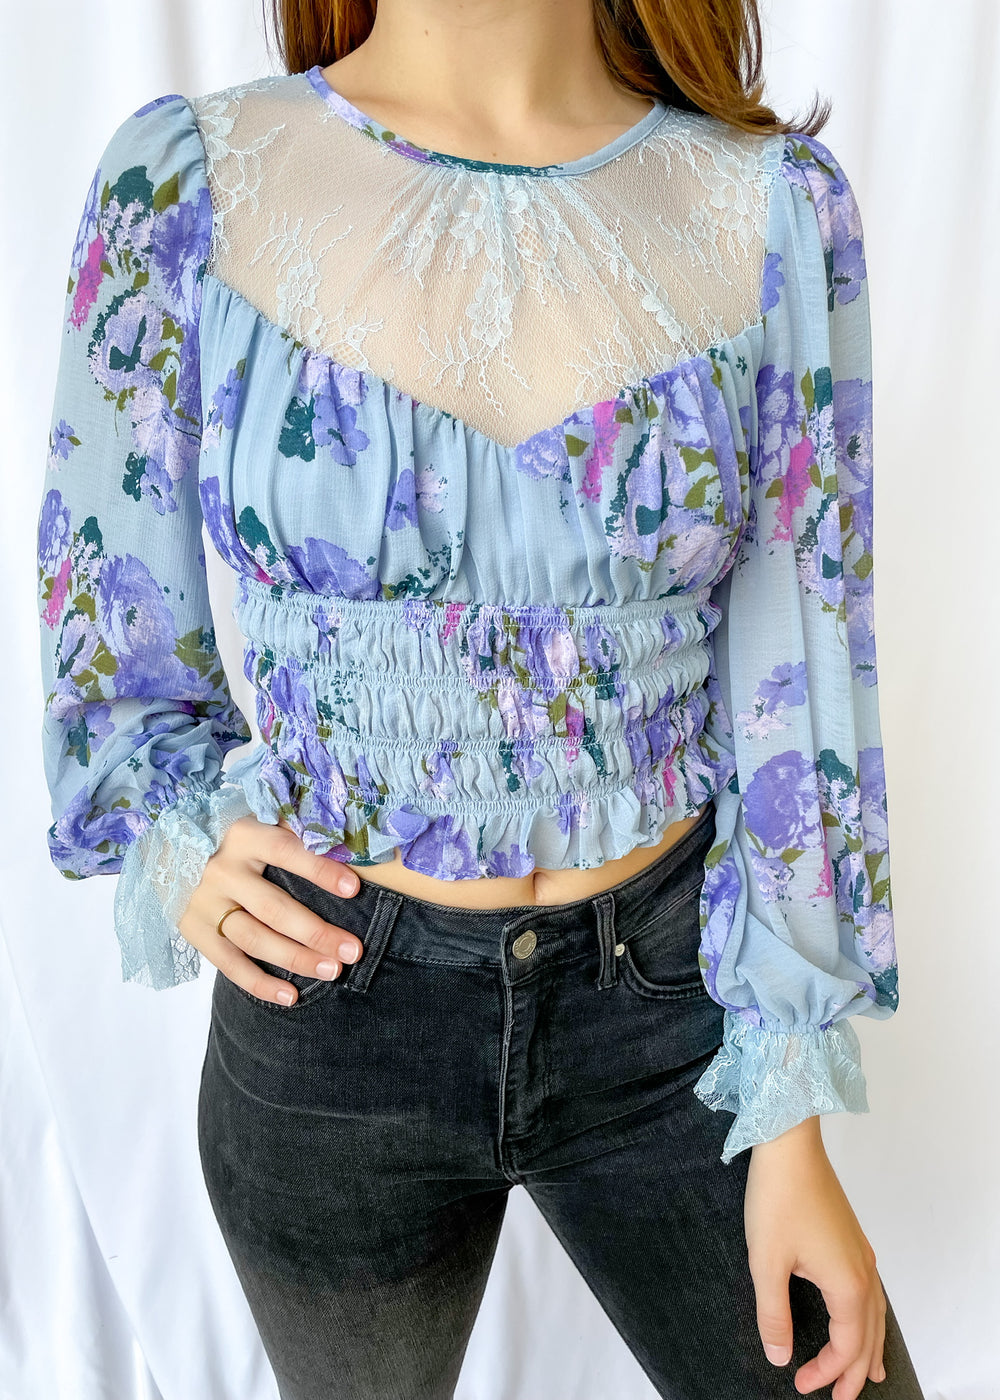 Free People Daphne Blouse, Tops, Free People, Adeline, dallas boutique, dallas texas, texas boutique, women's boutique dallas, adeline boutique, dallas boutique, trendy boutique, affordable boutique